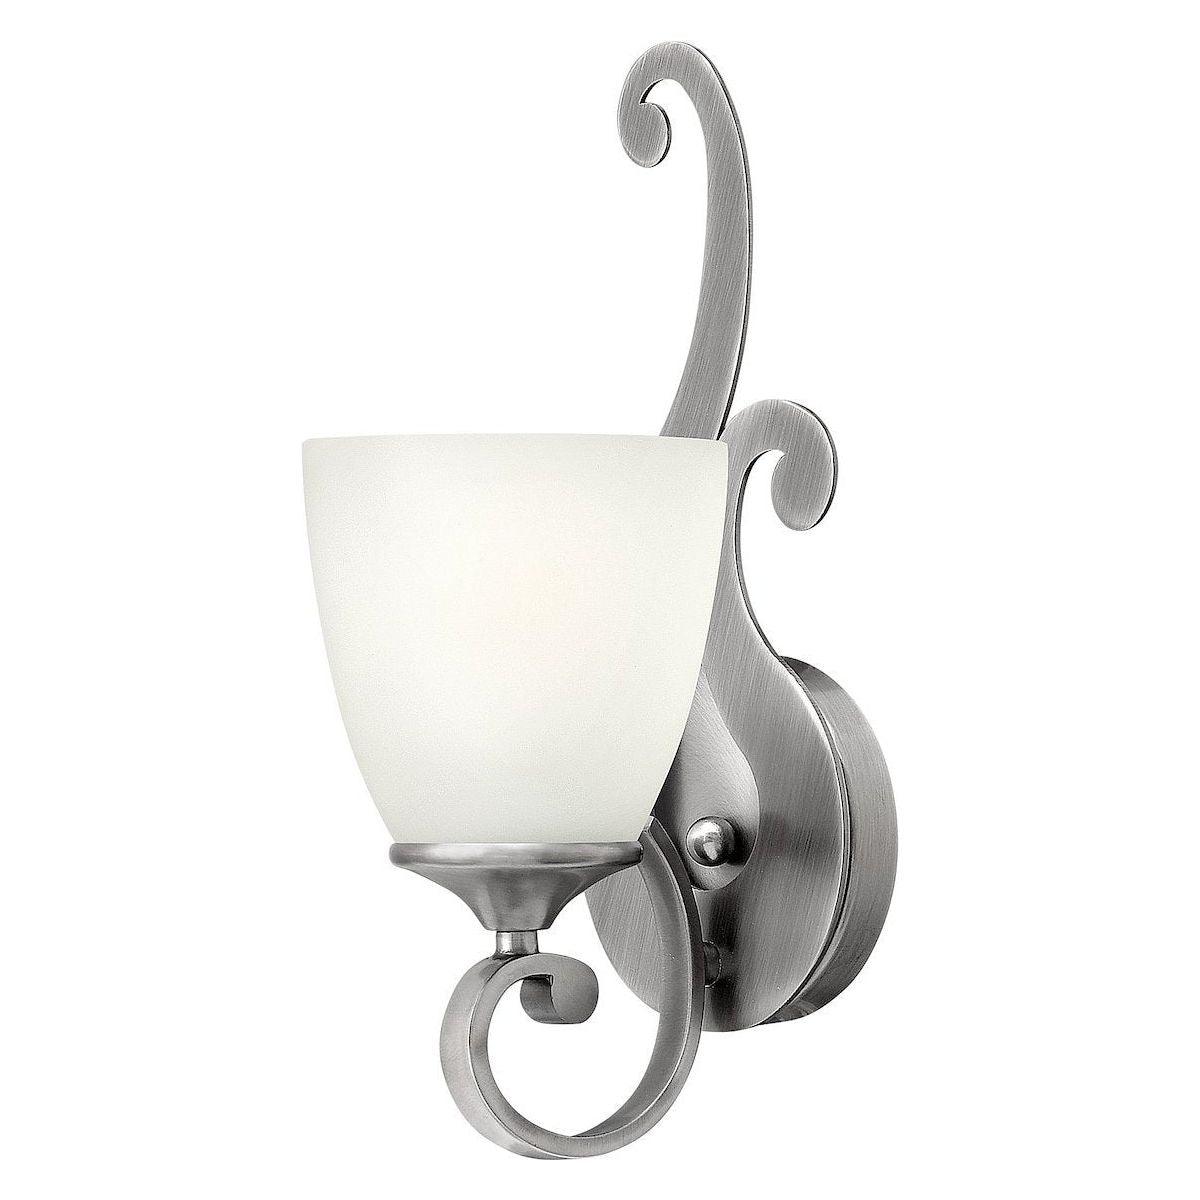 Hinkley - Reese Sconce - Lights Canada